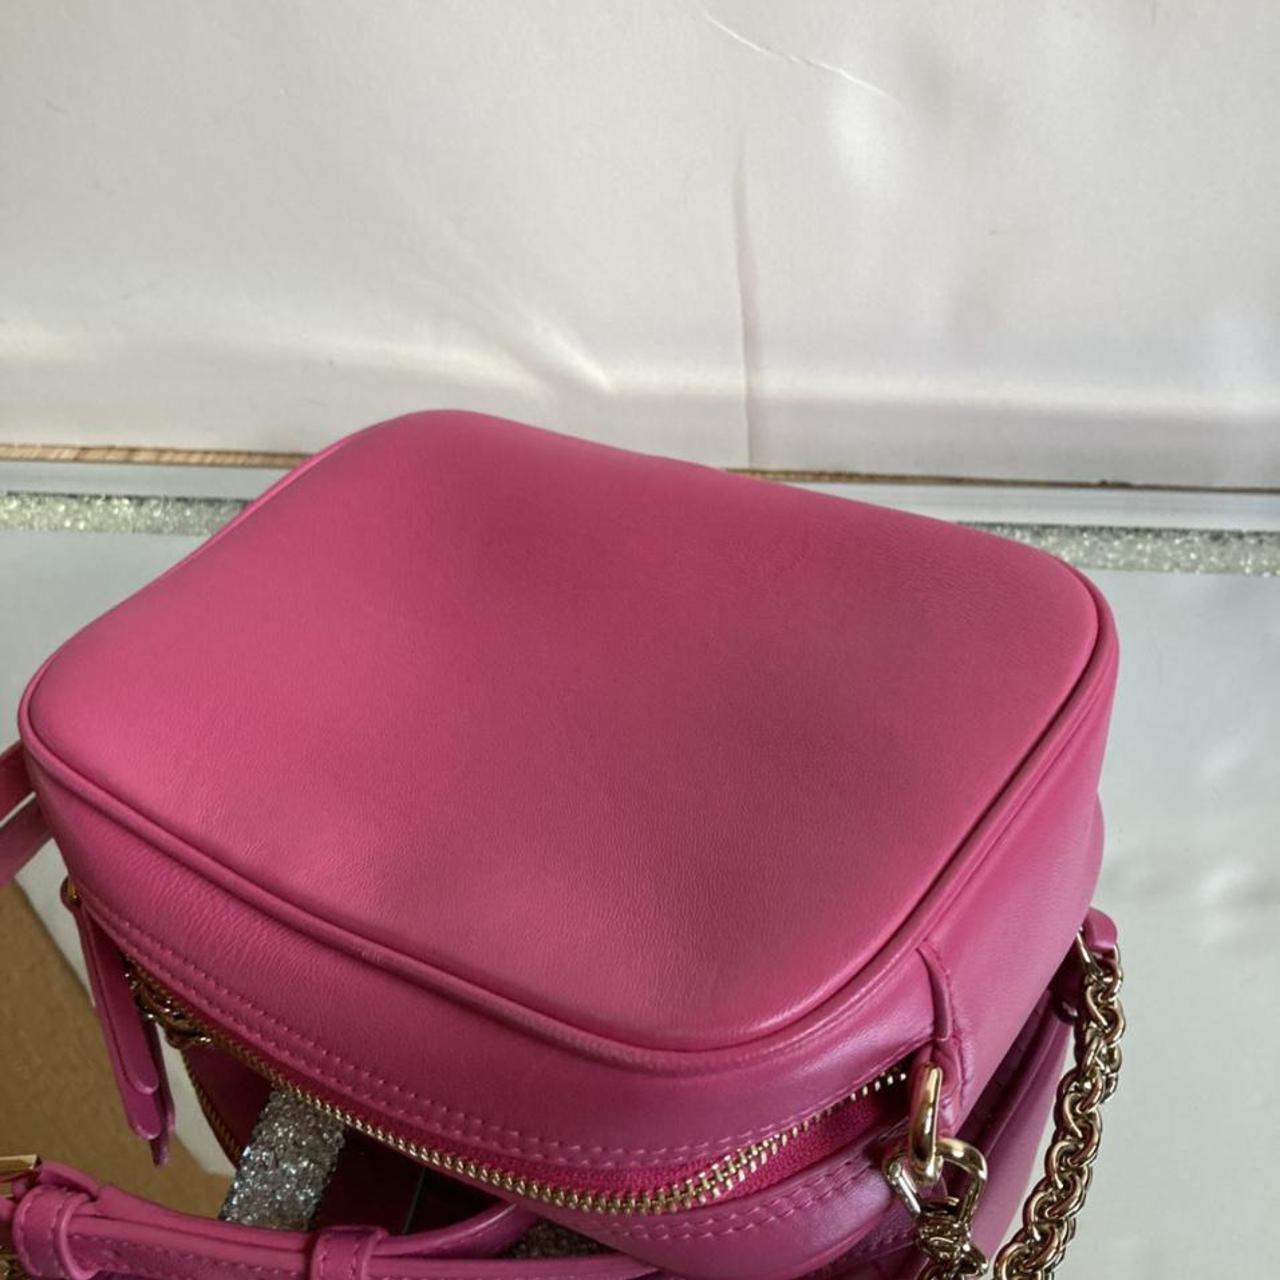 Product Image 3 - Furla
Hot pink
Quilted

Japanese style korean style